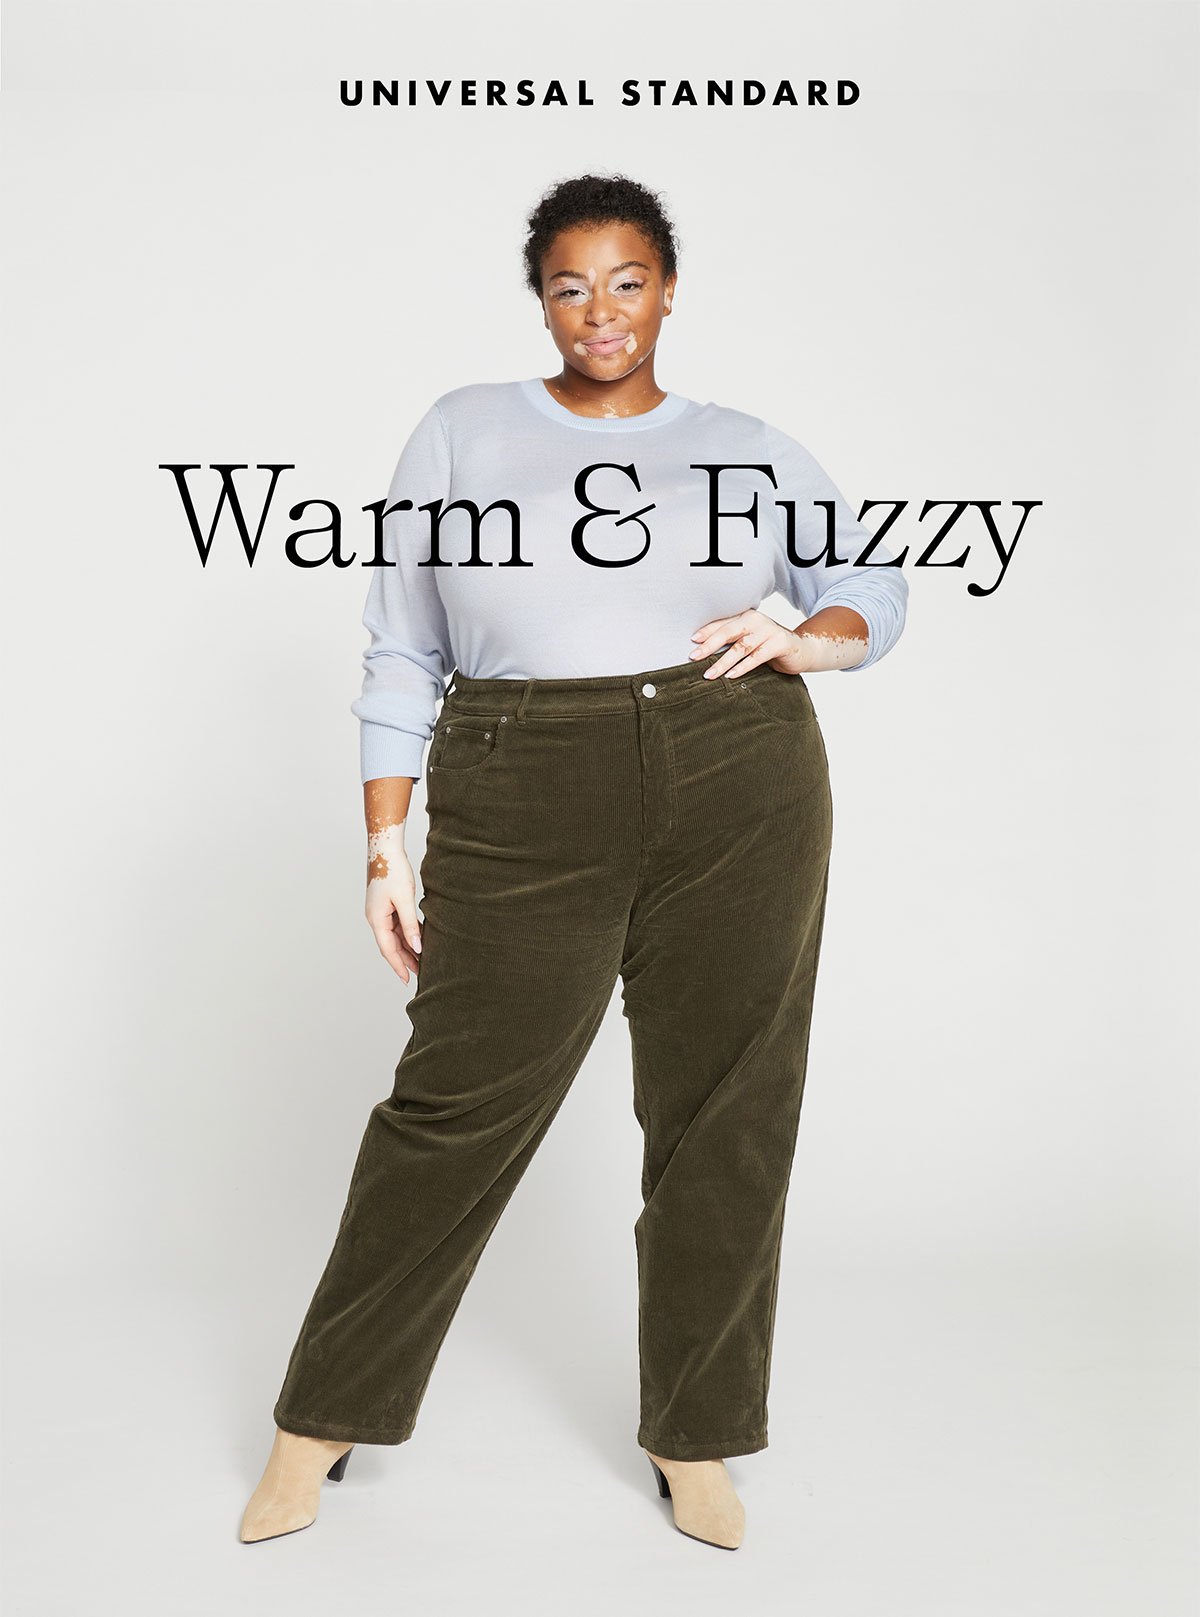 Pair our corduroy with merino wool